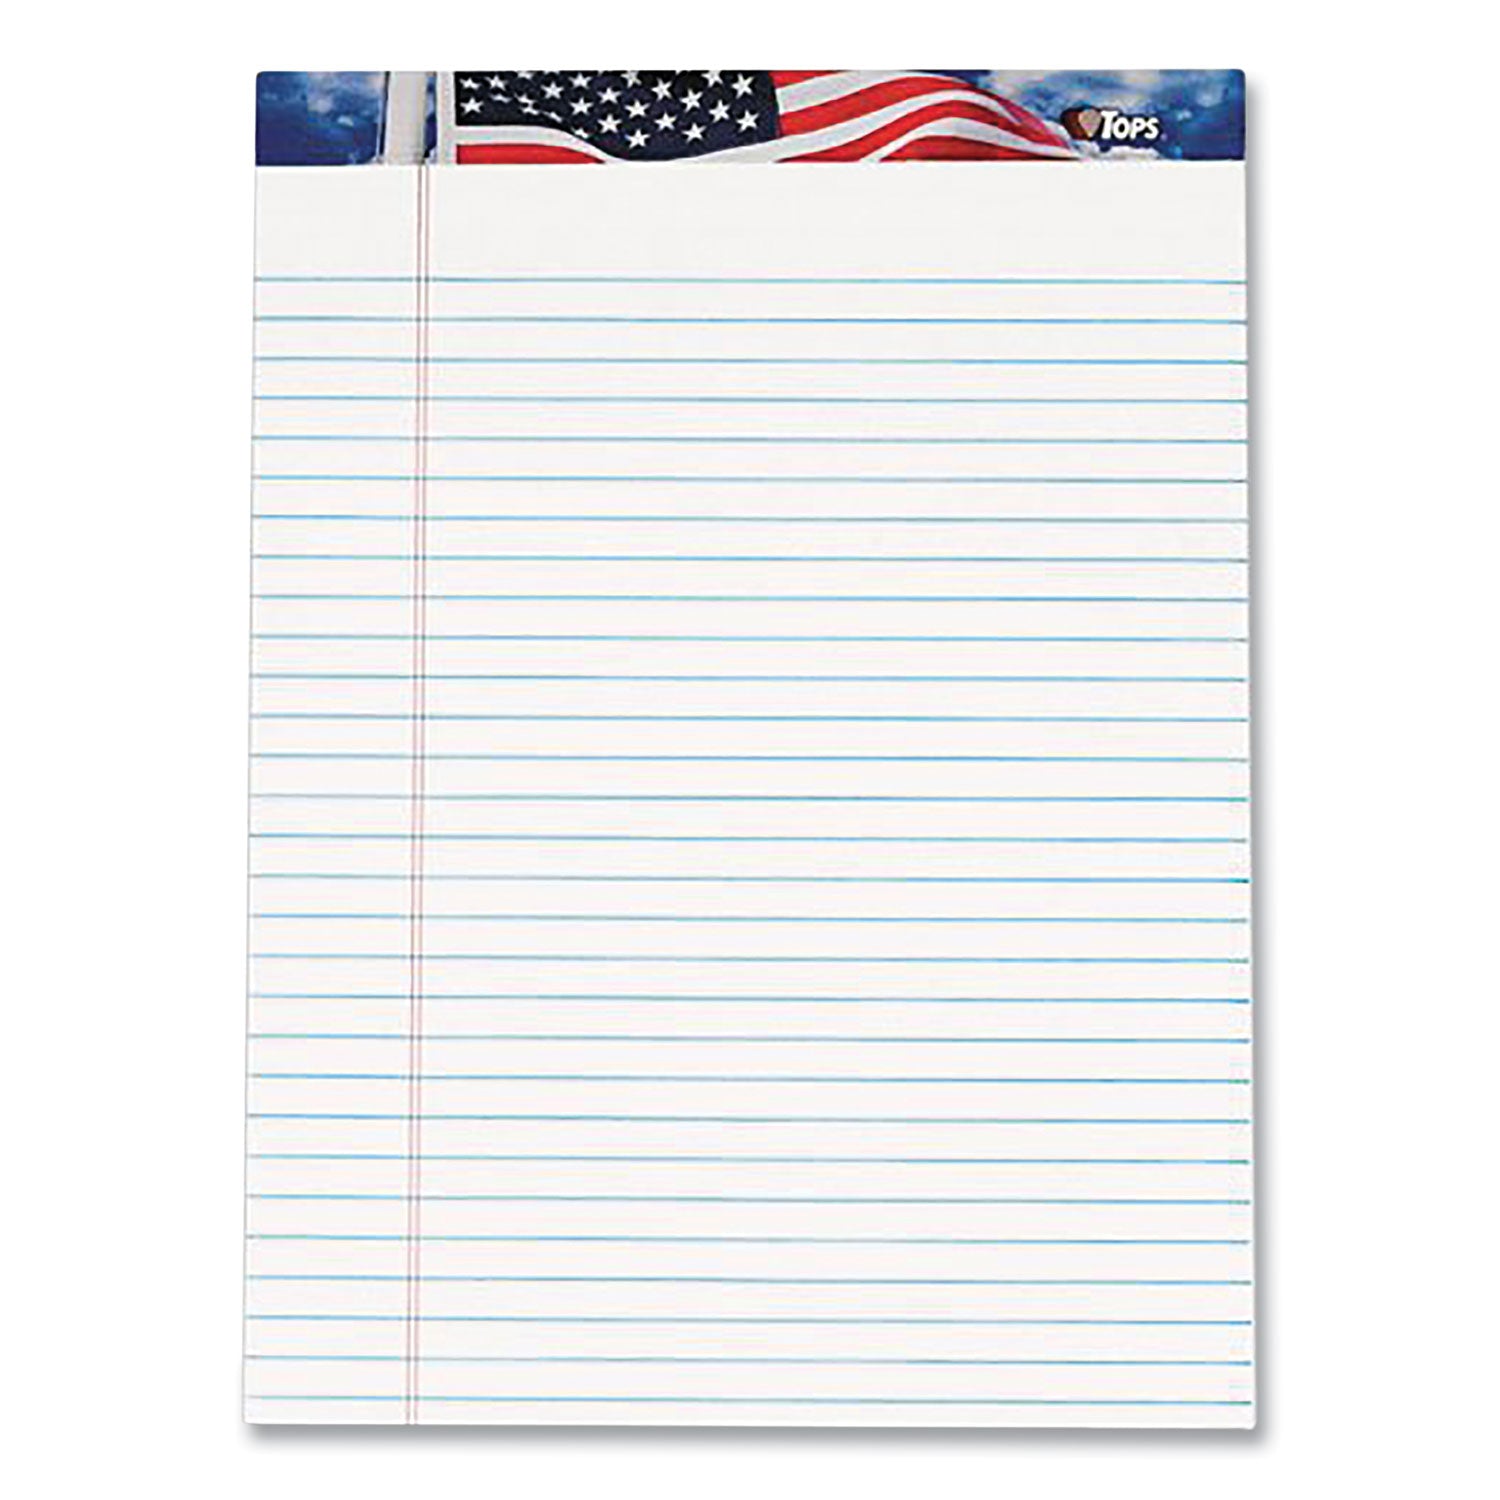 American Pride Writing Pad, Wide/Legal Rule, Red/White/Blue Headband, 50 White 8.5 x 11.75 Sheets, 12/Pack - 